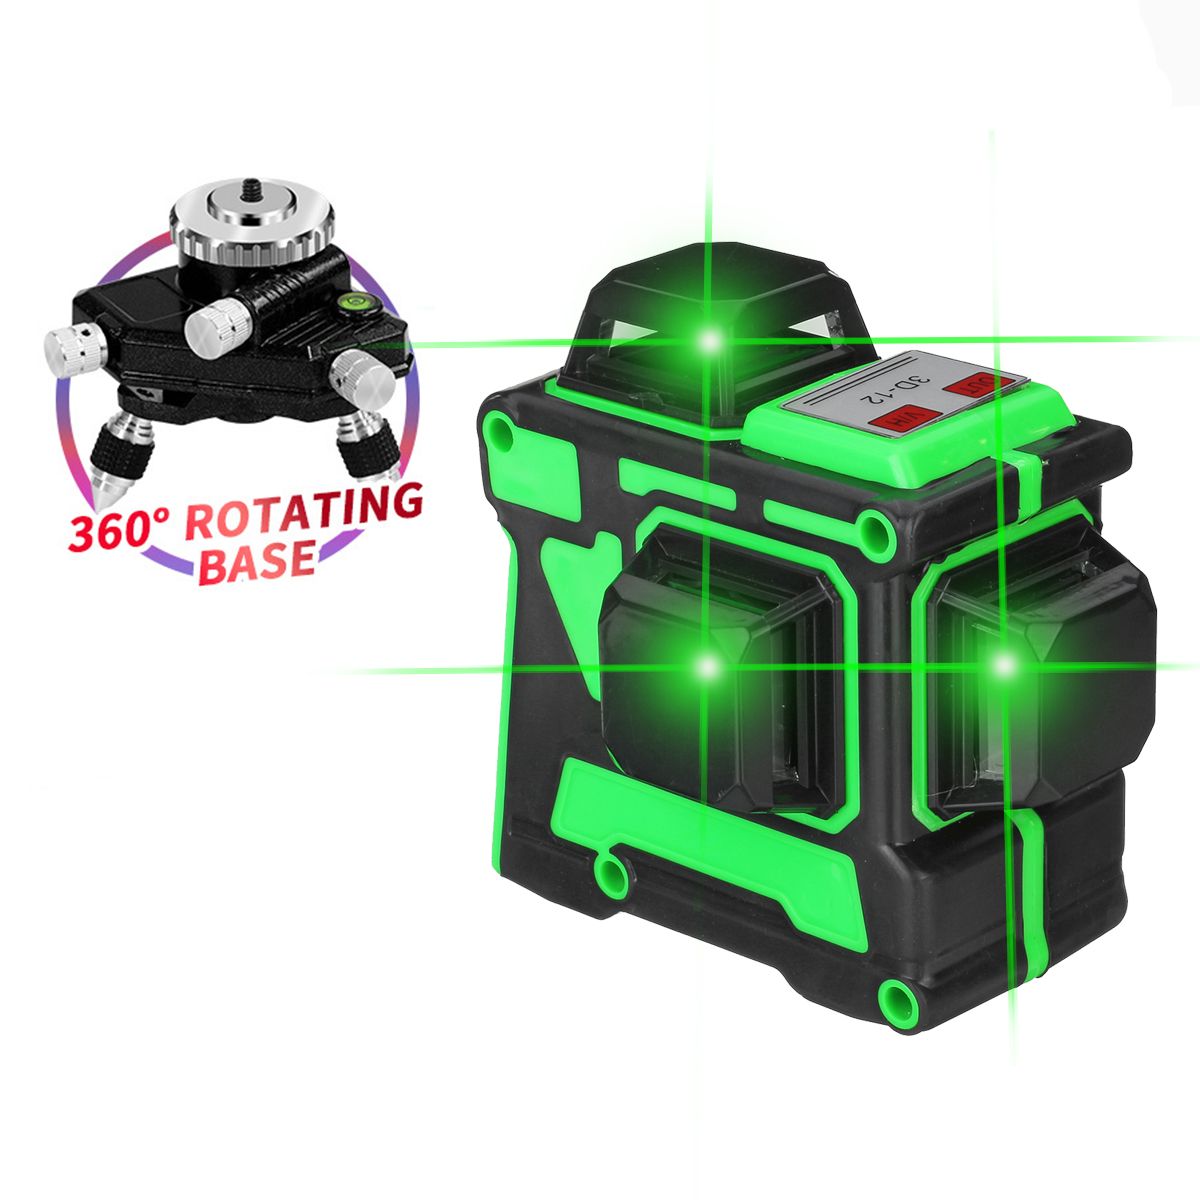 12-Lines-Cross-Green-Light-3D-Laser-360deg-Level-Self-Leveling-Rotary-Measure-Tool-Indoor-and-Outdoo-1748439